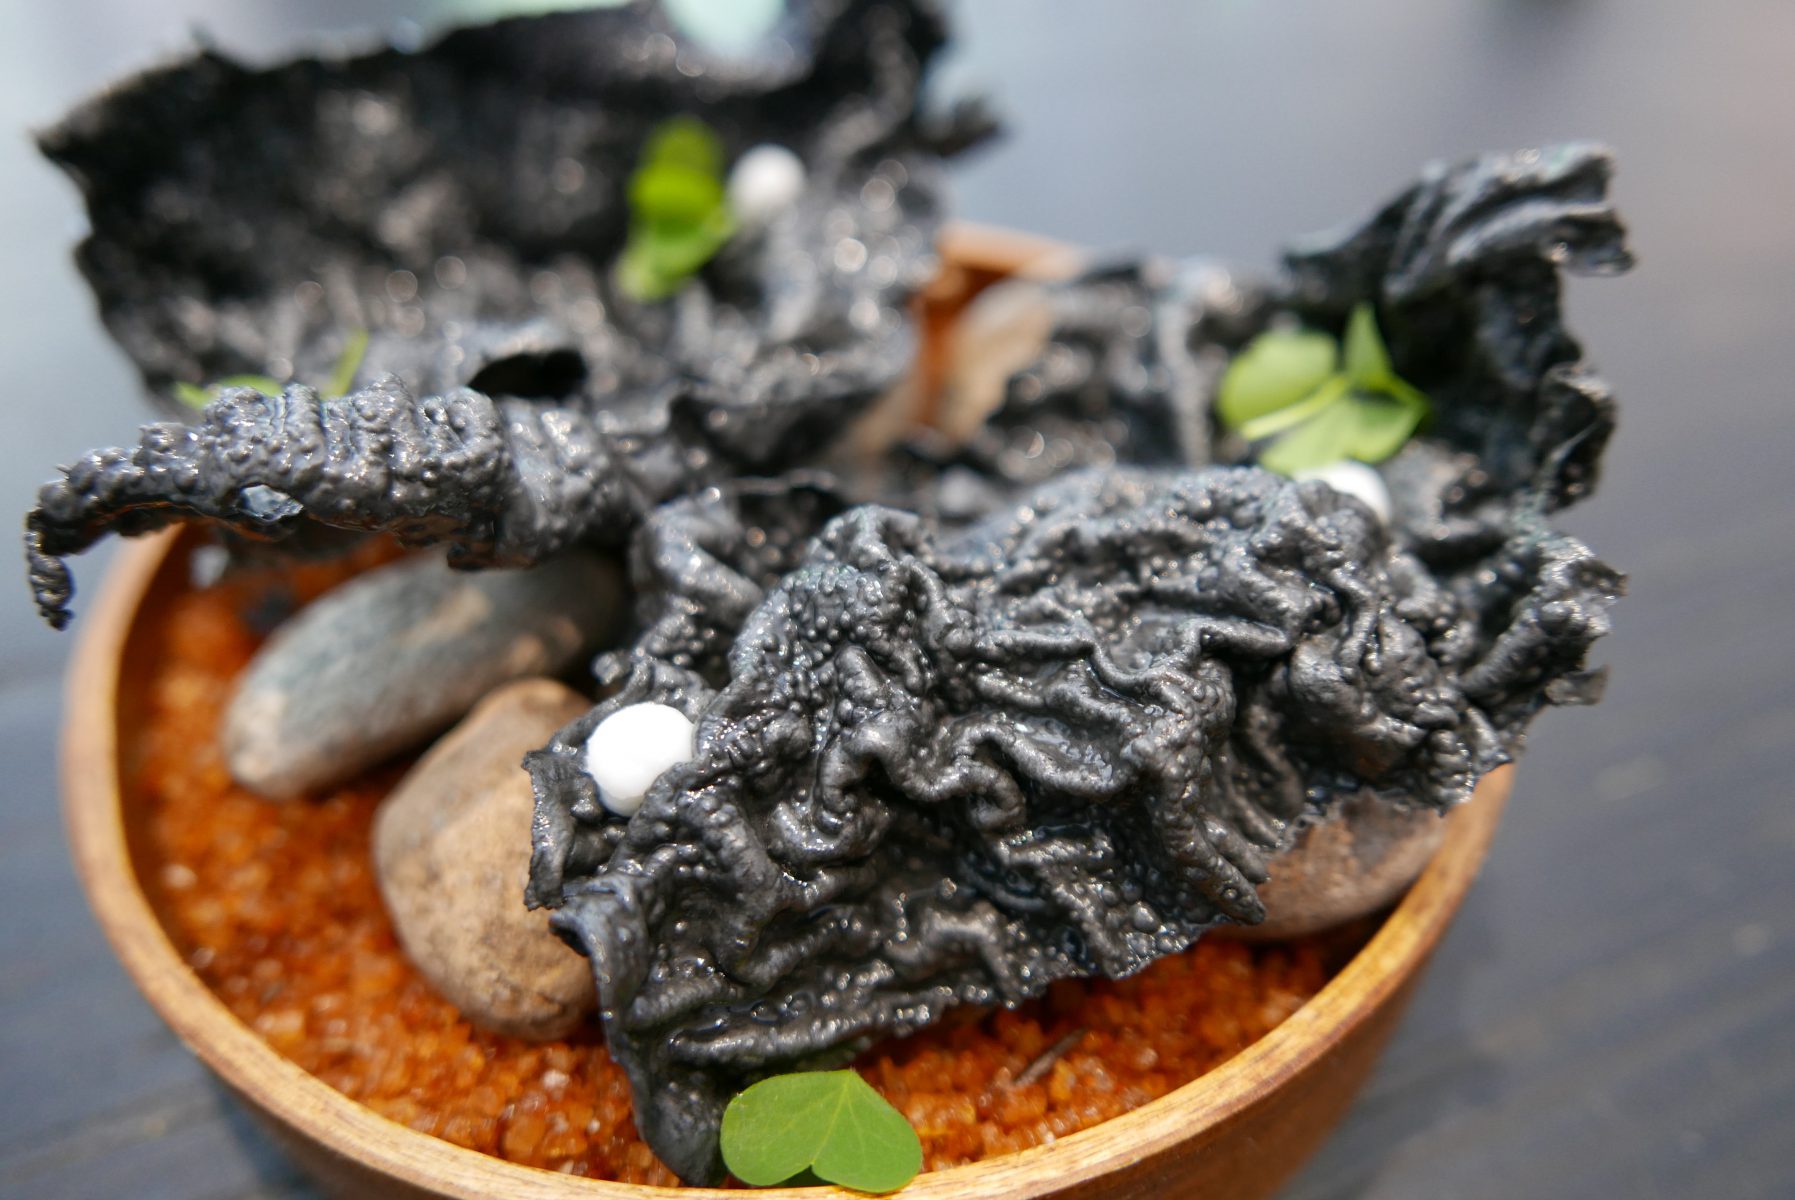 "Charcoal" chips